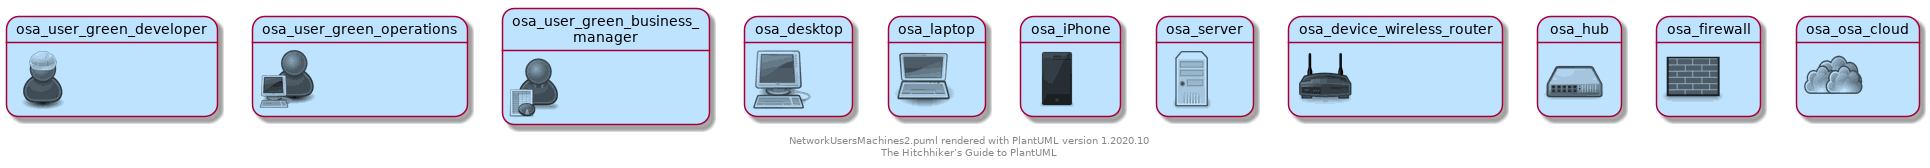 @startuml

!define osaPuml https://raw.githubusercontent.com/Crashedmind/PlantUML-opensecurityarchitecture2-icons/master
!include osaPuml/Common.puml
!include osaPuml/User/all.puml
!include osaPuml/Hardware/all.puml
!include osaPuml/Misc/all.puml
!include osaPuml/Server/all.puml
!include osaPuml/Site/all.puml

' Users
osa_user_green_developer: <$osa_user_green_developer>
osa_user_green_operations: <$osa_user_green_operations>
osa_user_green_business_manager: <$osa_user_green_business_manager>

' Devices
osa_desktop: <$osa_desktop>
osa_laptop: <$osa_laptop>
osa_iPhone: <$osa_iPhone>
osa_server: <$osa_server>

' Network
osa_device_wireless_router: <$osa_device_wireless_router>
osa_hub: <$osa_hub>
osa_firewall: <$osa_firewall>
osa_osa_cloud: <$osa_cloud>

footer %filename() rendered with PlantUML version %version()\nThe Hitchhiker’s Guide to PlantUML
@enduml
